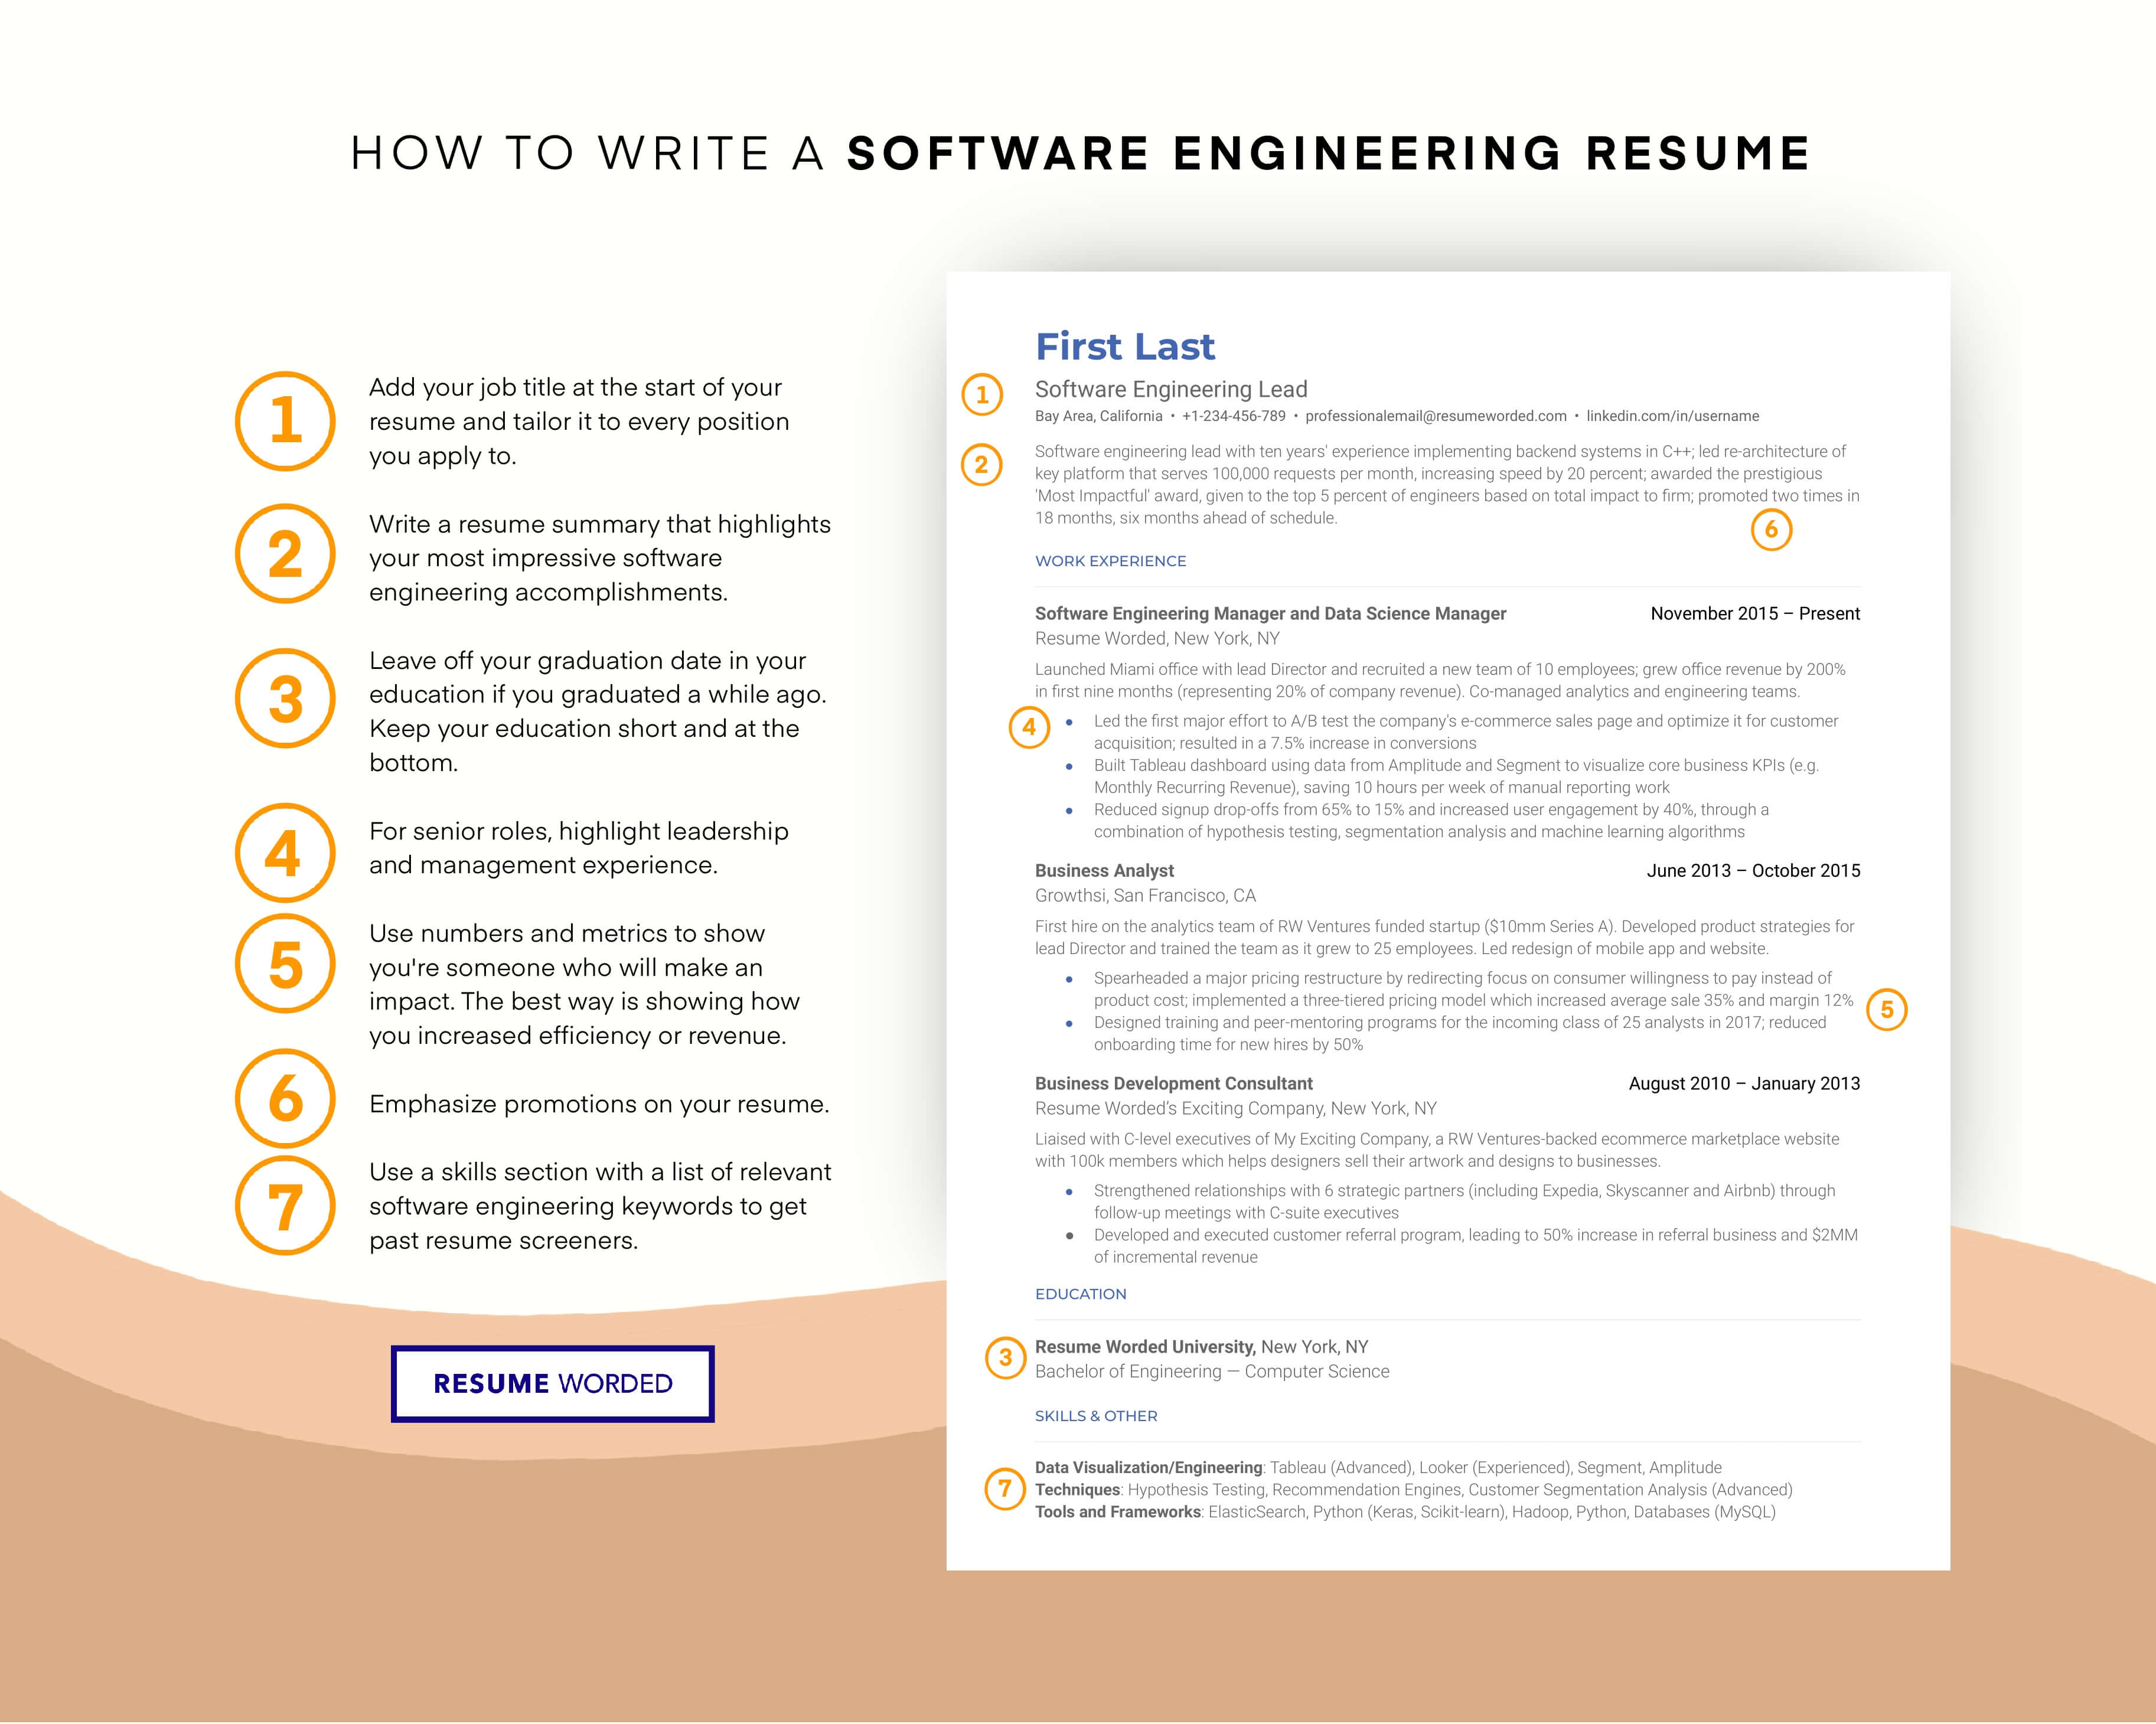 Highlight your software knowledge - Entry Level Bookkeeper Resume